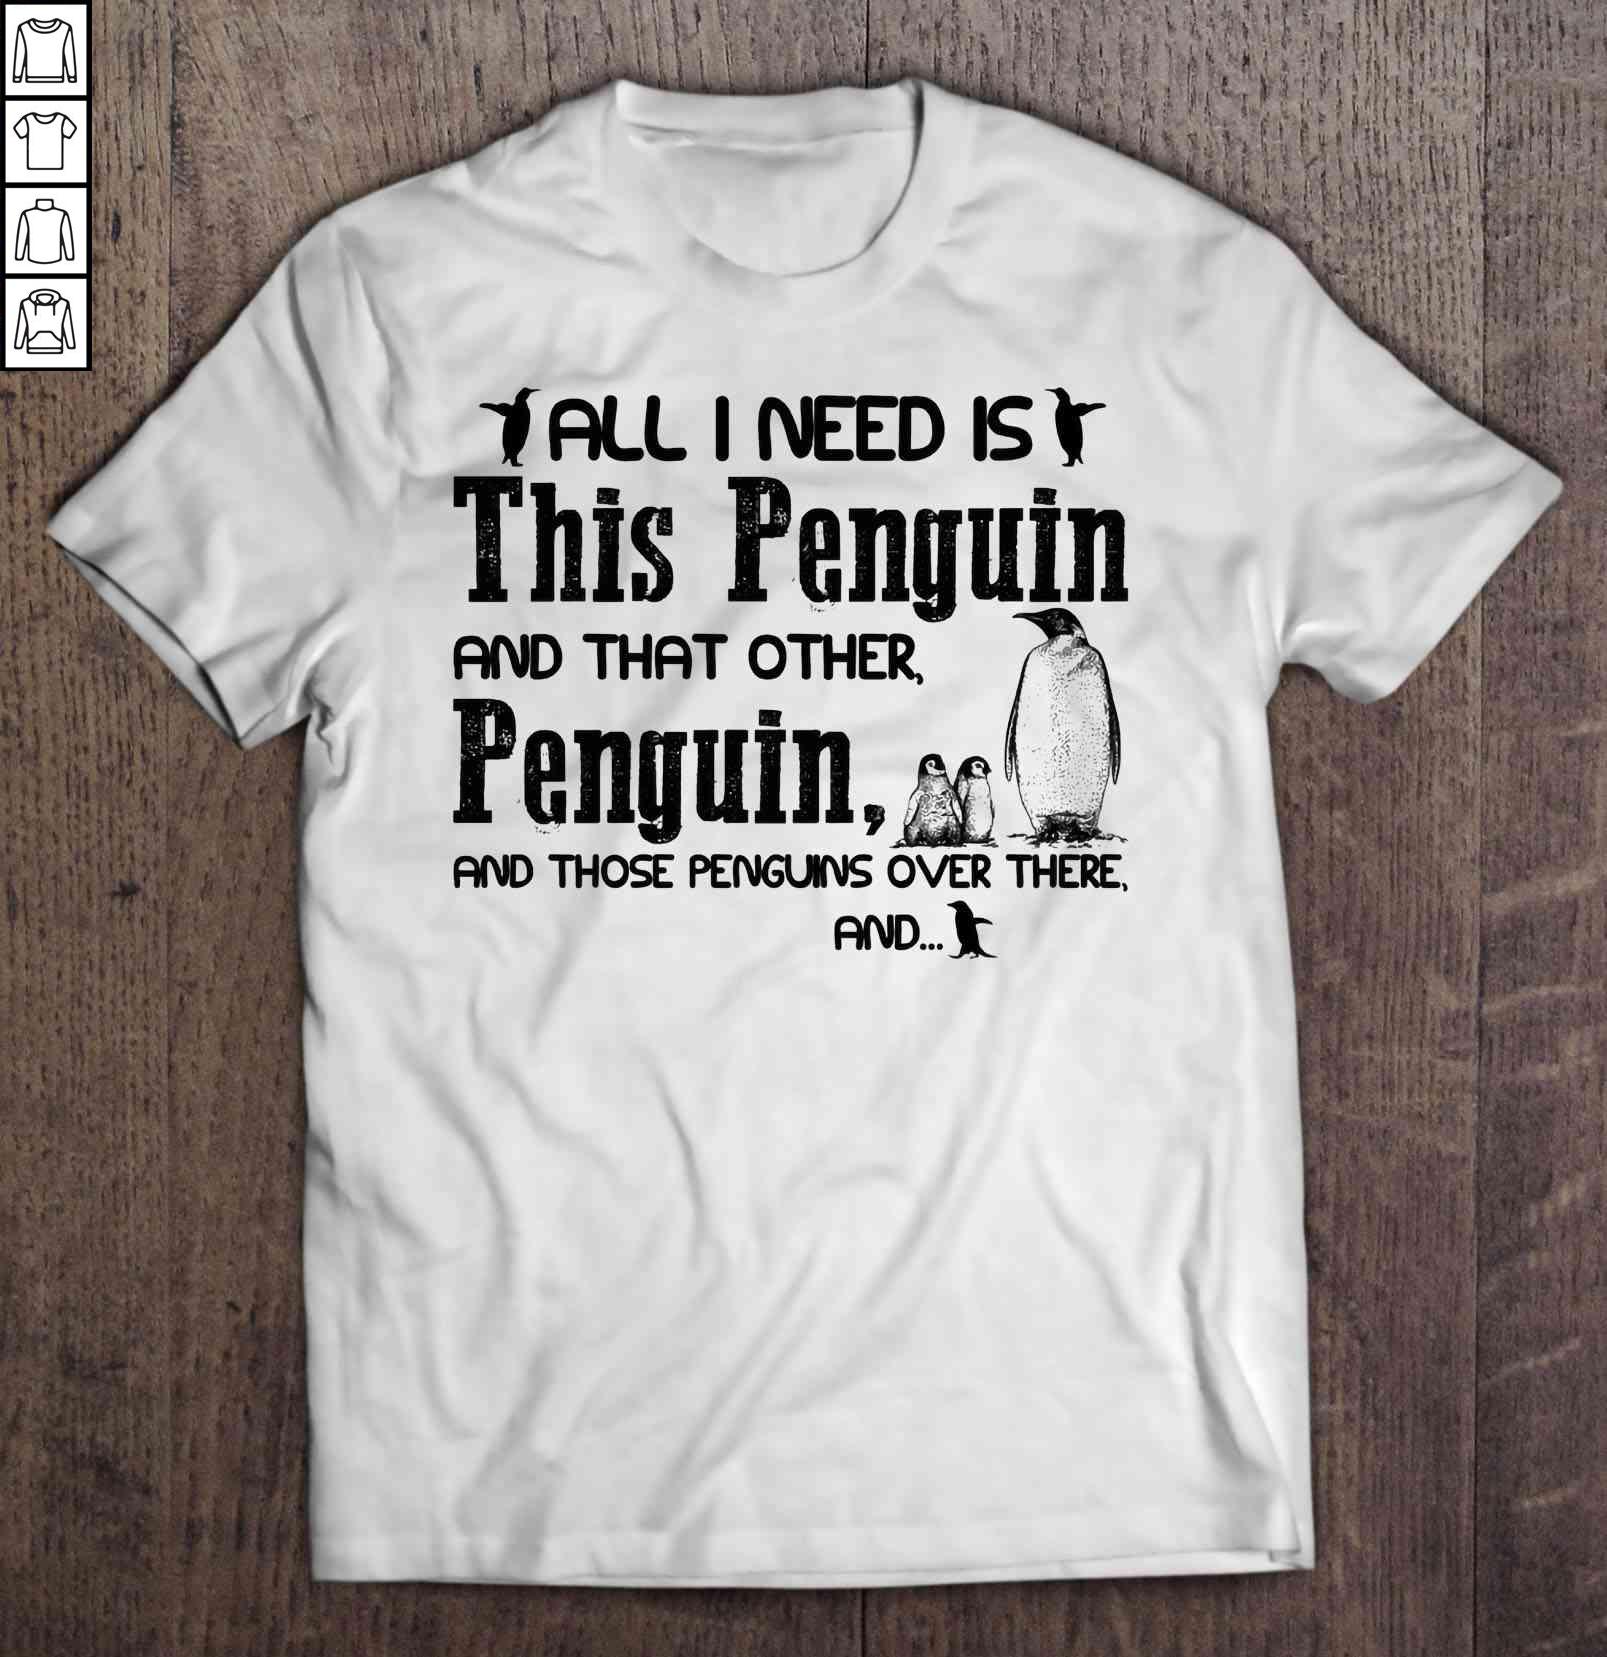 All I Need Is This Penguin And That Other Penguin And Those Penguins Over There And2 TShirt